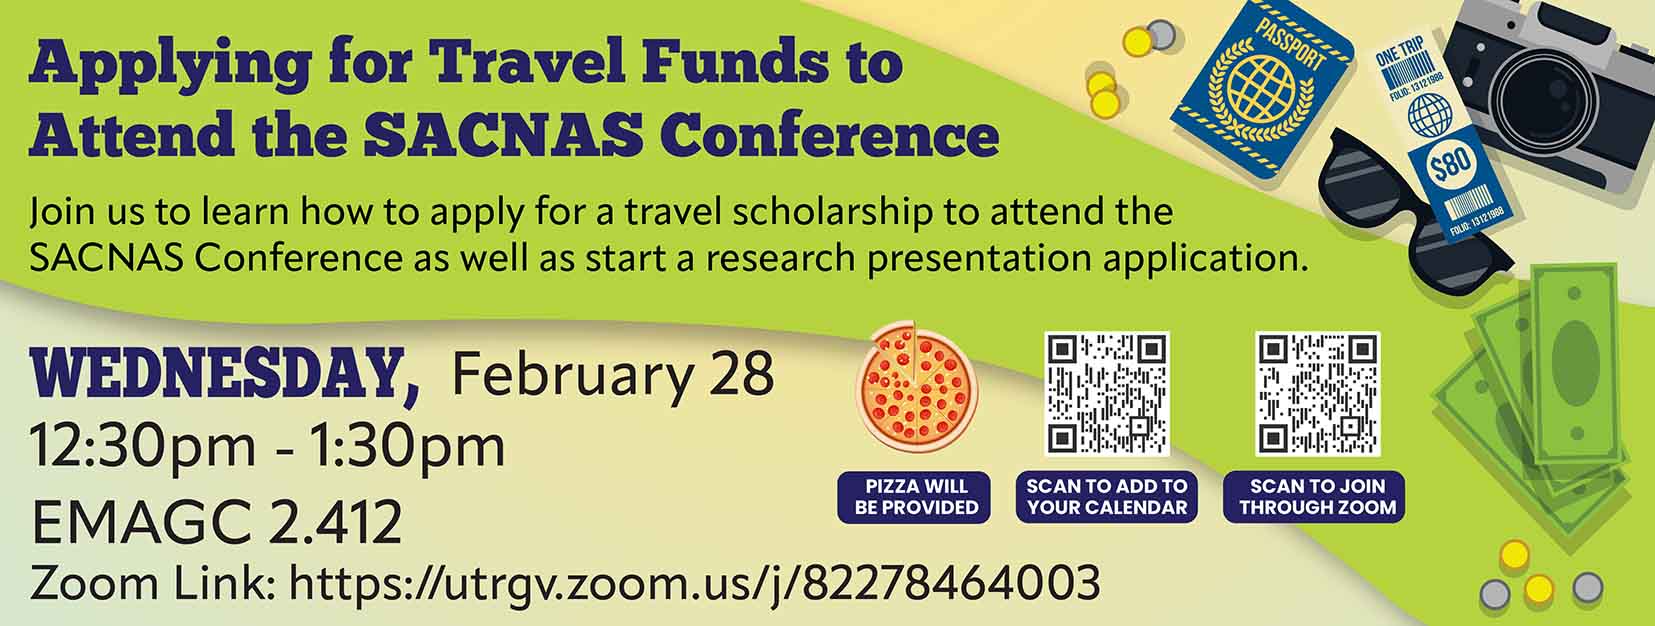 applying to sacnas conference